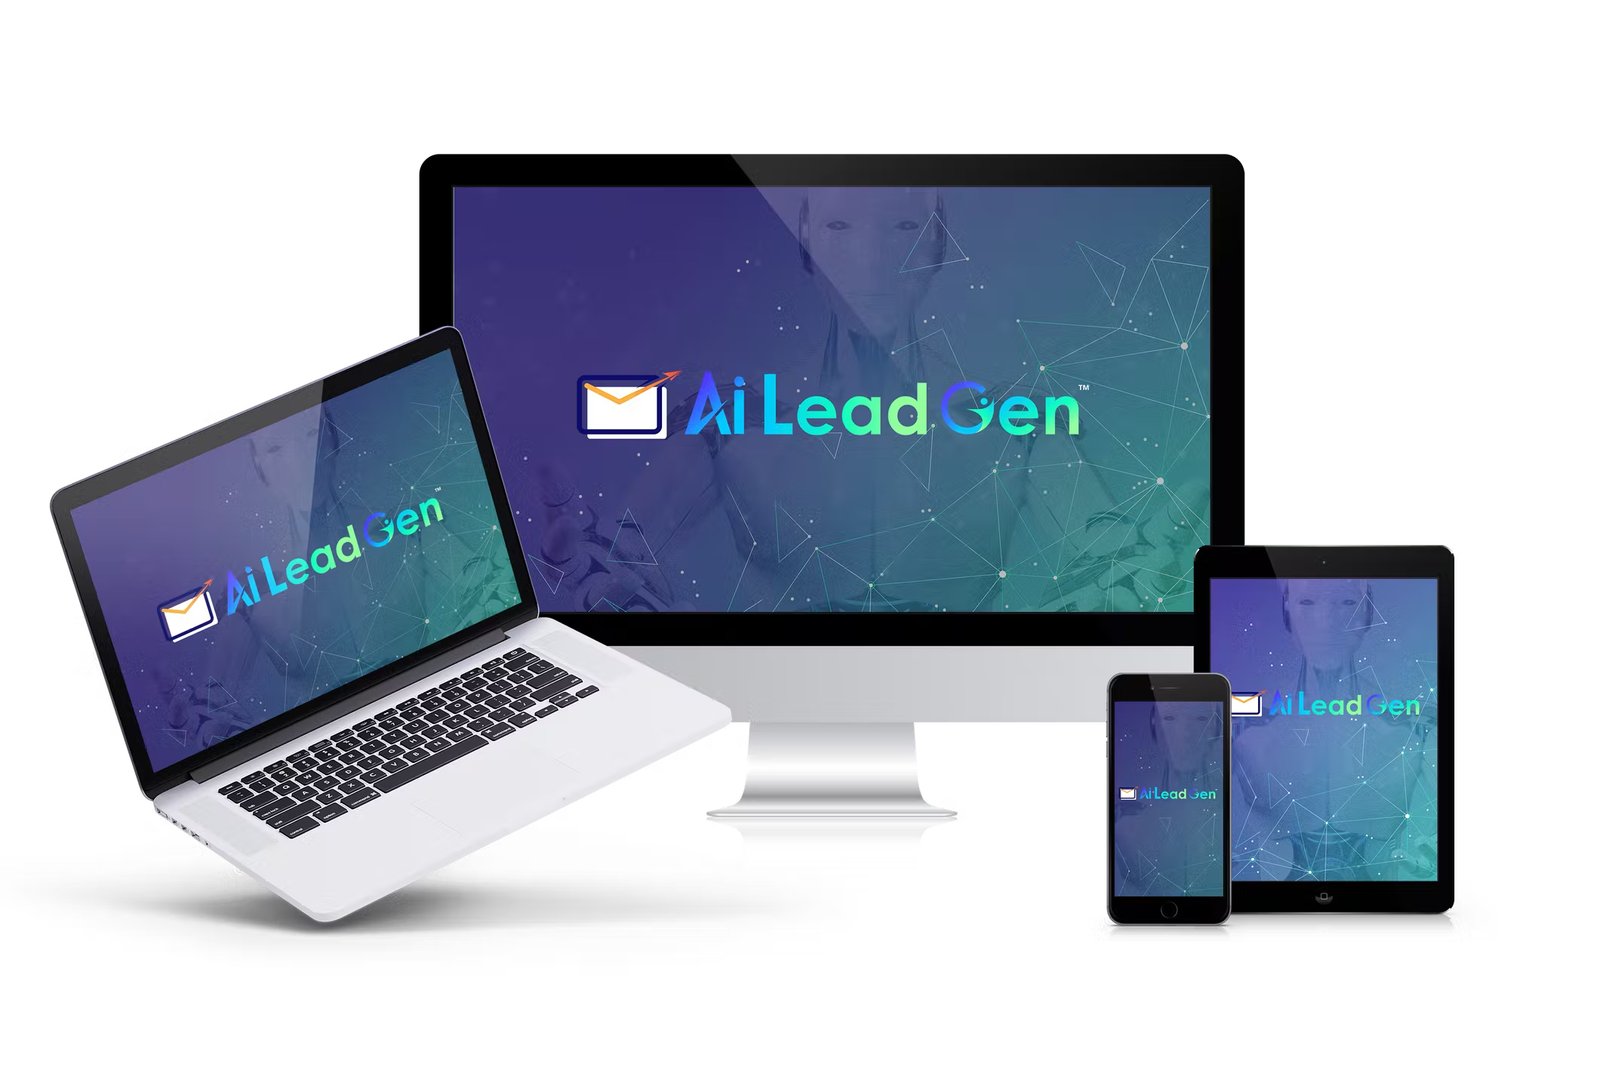 AI Lead Gen Review - First ChatGPT To Generate Unlimited Leads Using AI Technology